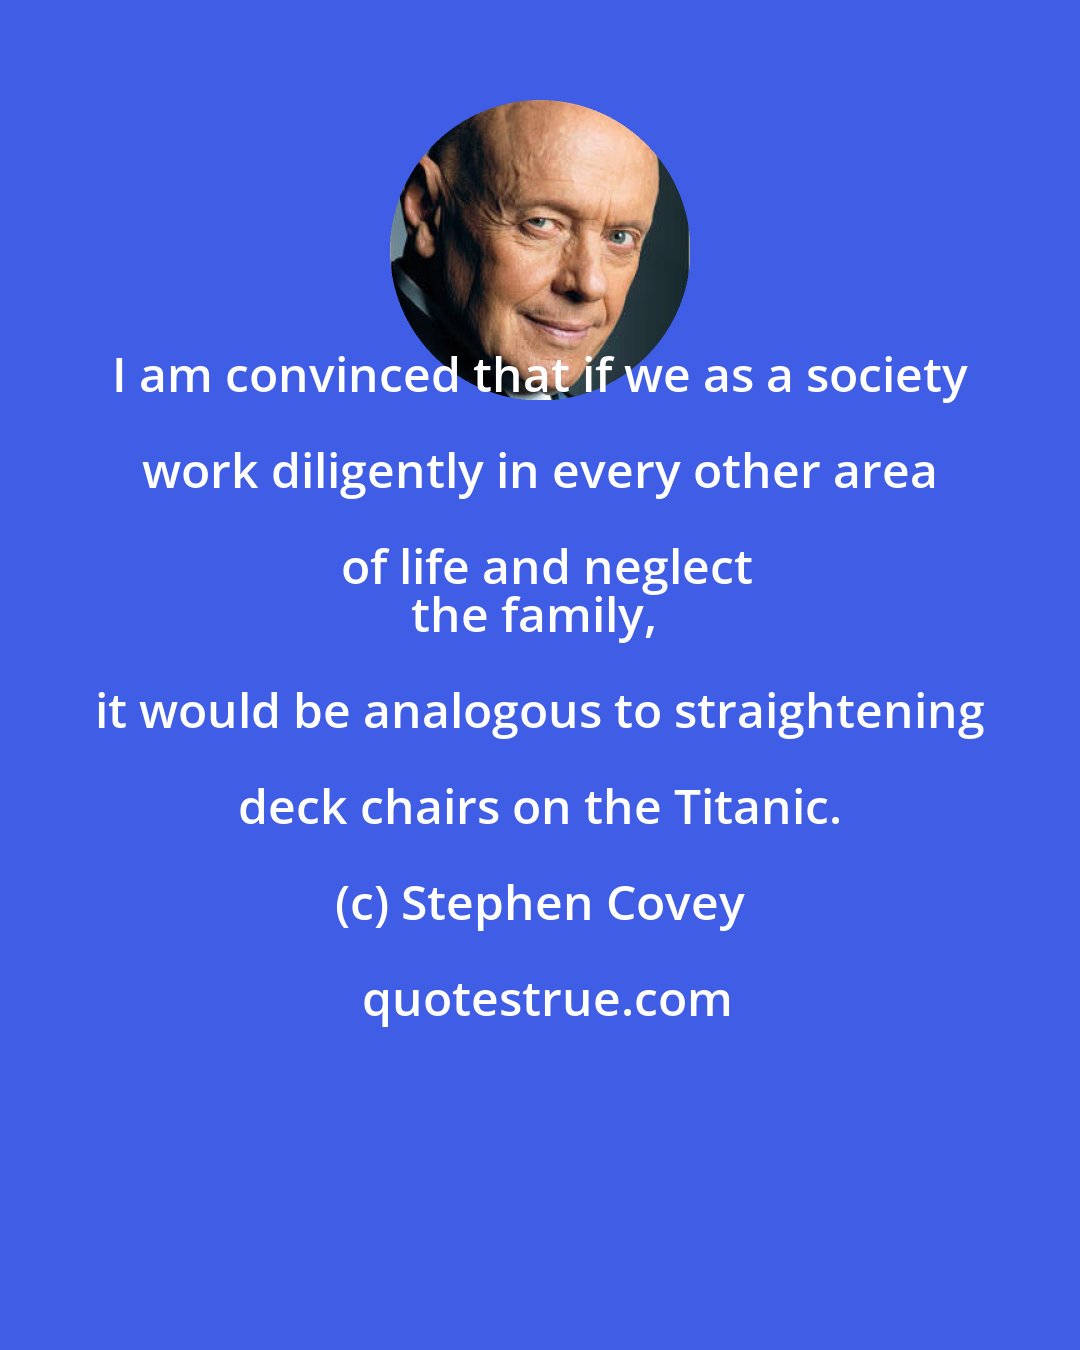 Stephen Covey: I am convinced that if we as a society work diligently in every other area of life and neglect
the family, it would be analogous to straightening deck chairs on the Titanic.